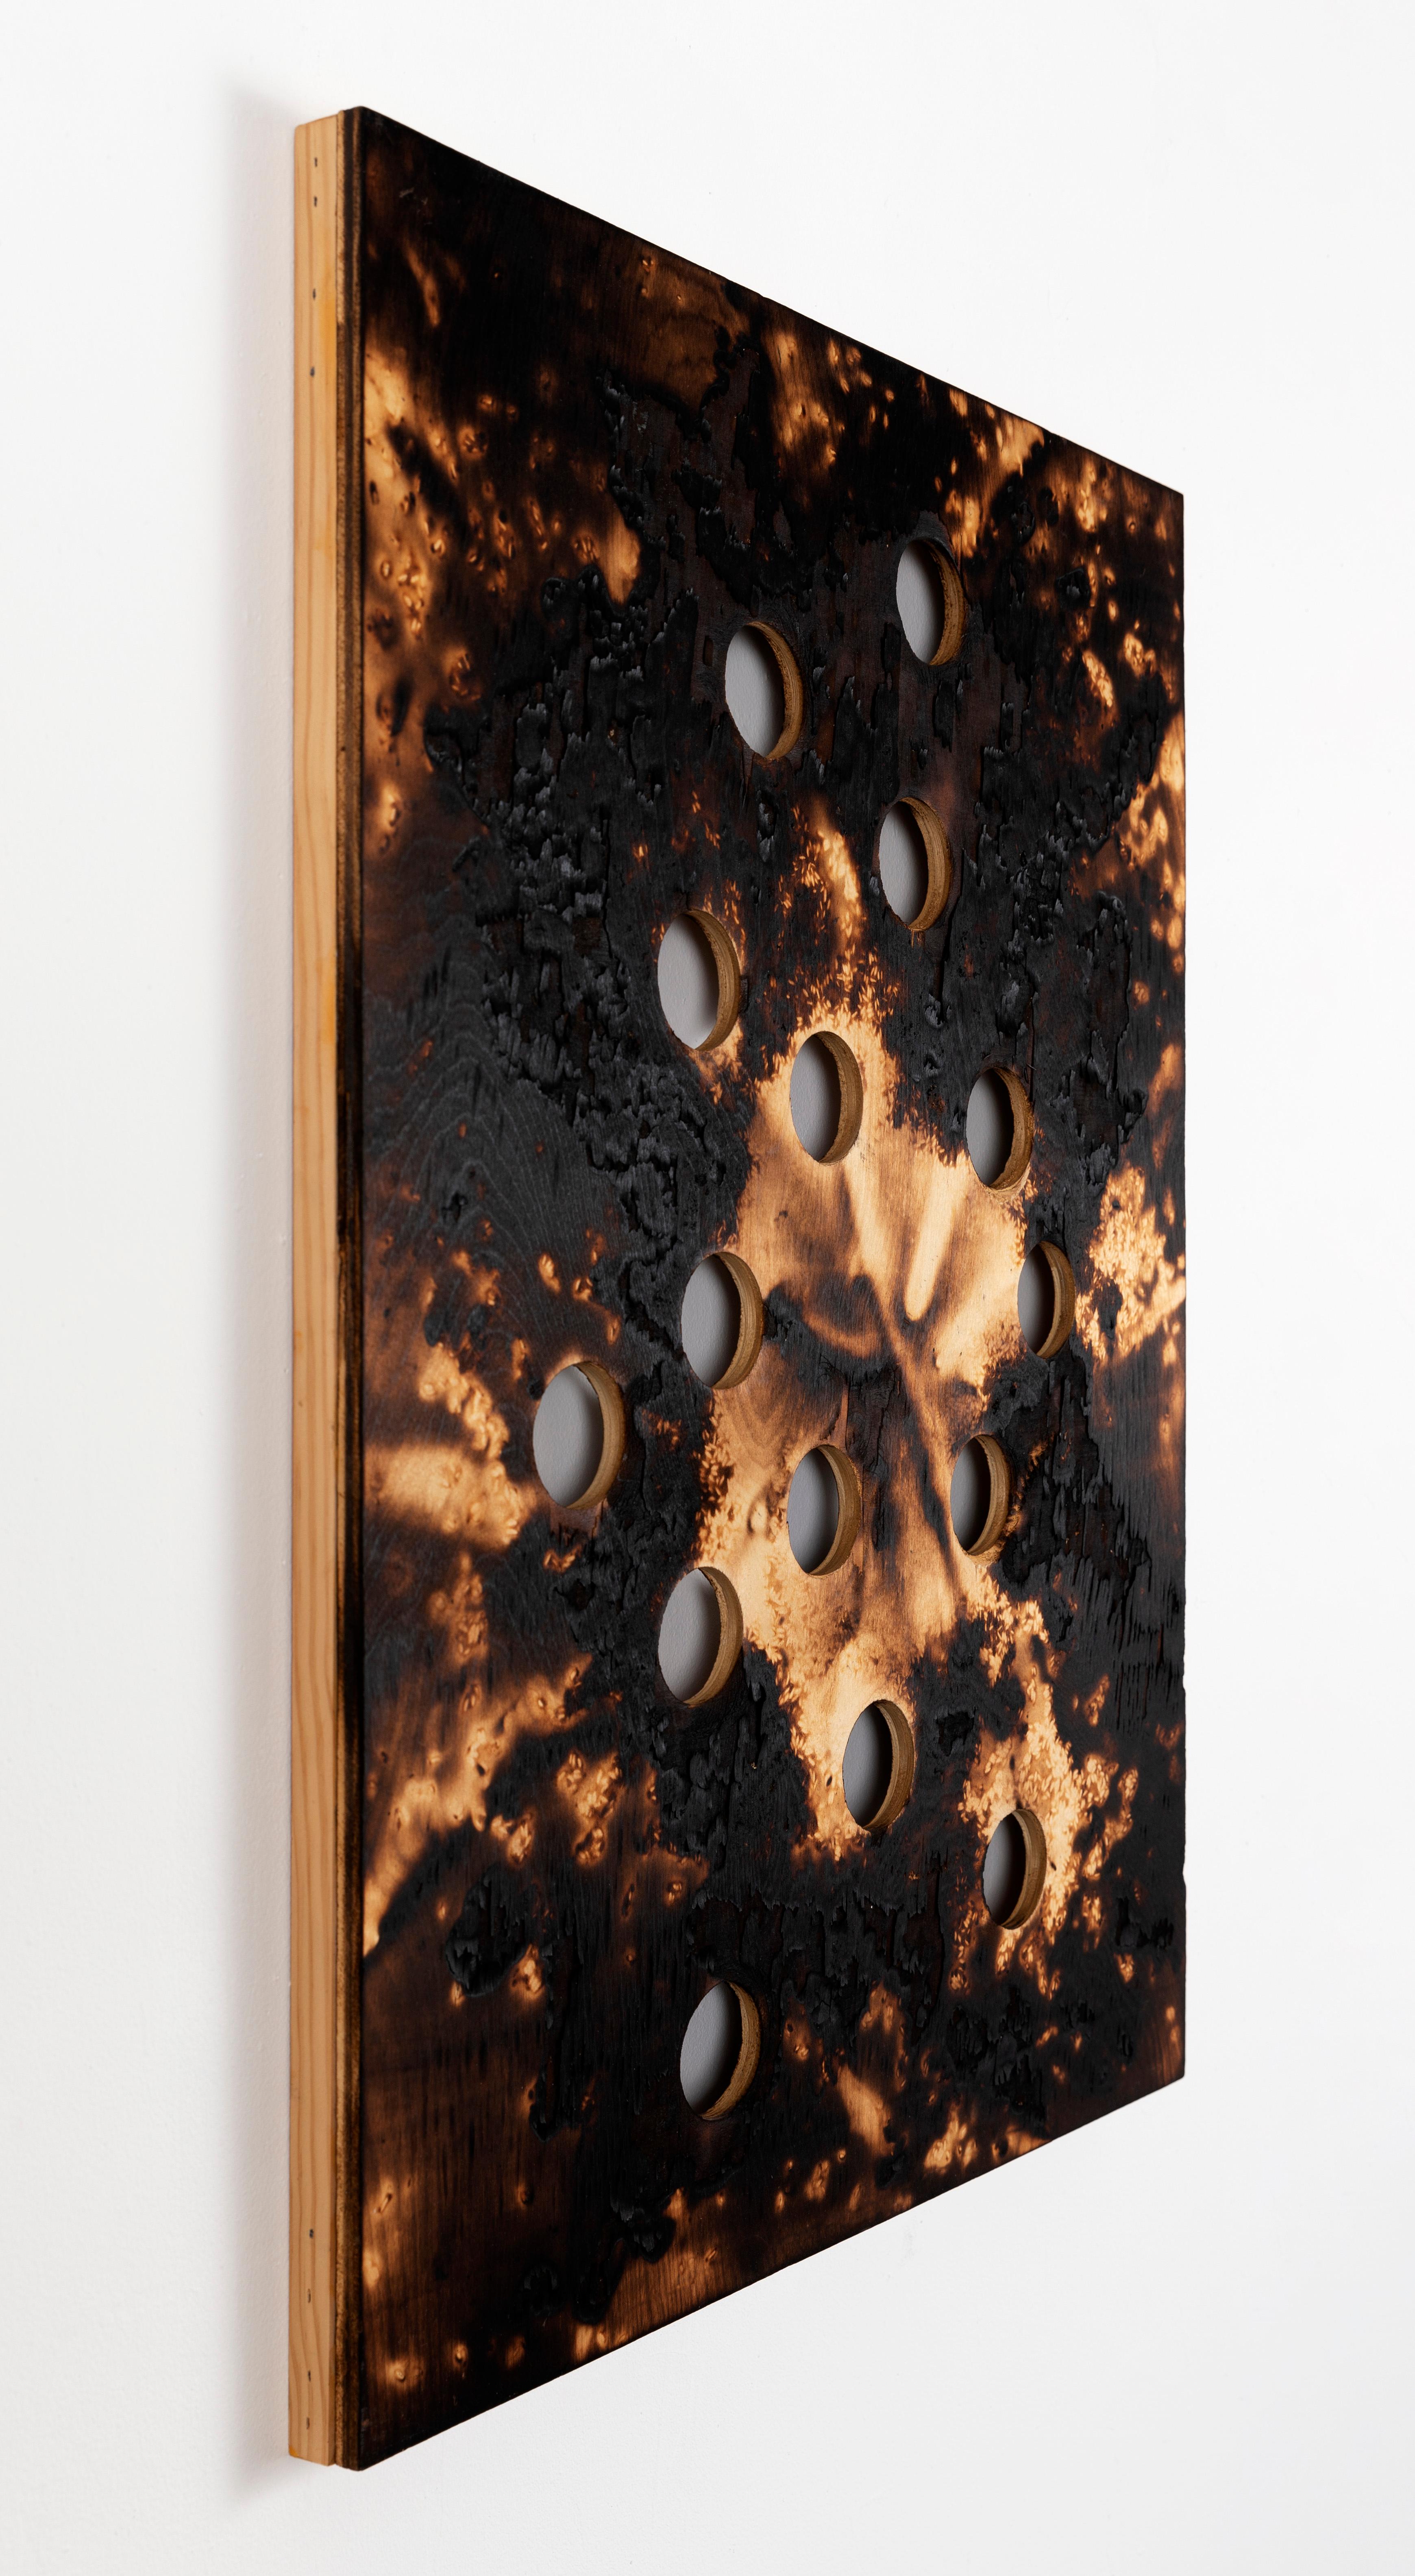 Pyre I, charred birch plywood abstract patterns earth tones created with fire - Painting by Michael Watson